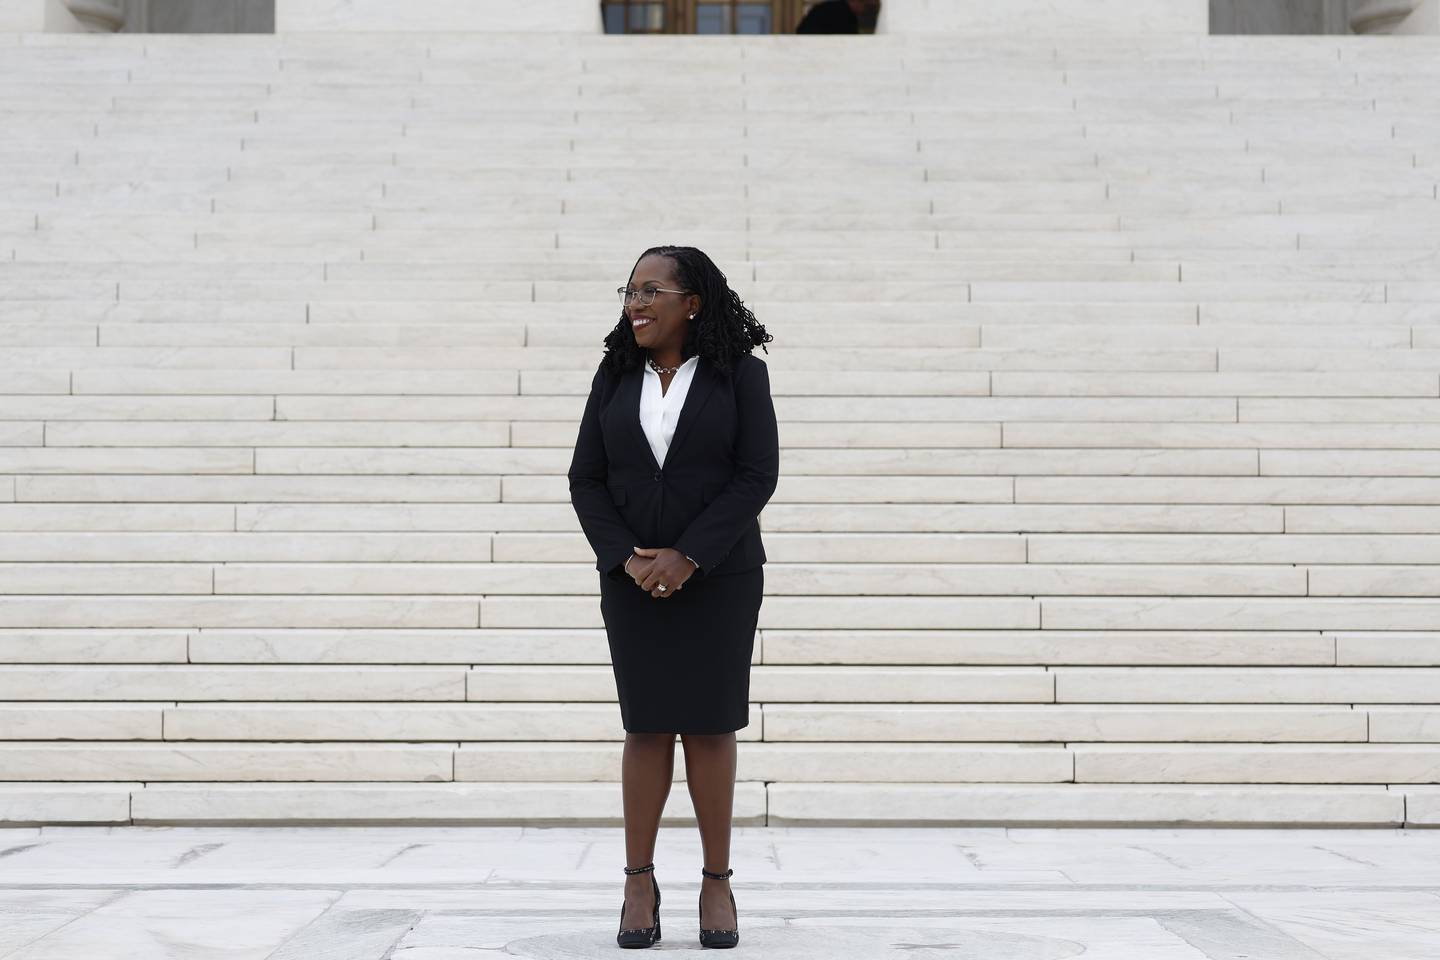 Supreme Court Associate Justice Ketanji Brown Jackson stands for a photo in front of the Supreme Court following her investiture ceremony on September 30, 2022 in Washington. Getty Images / AFP